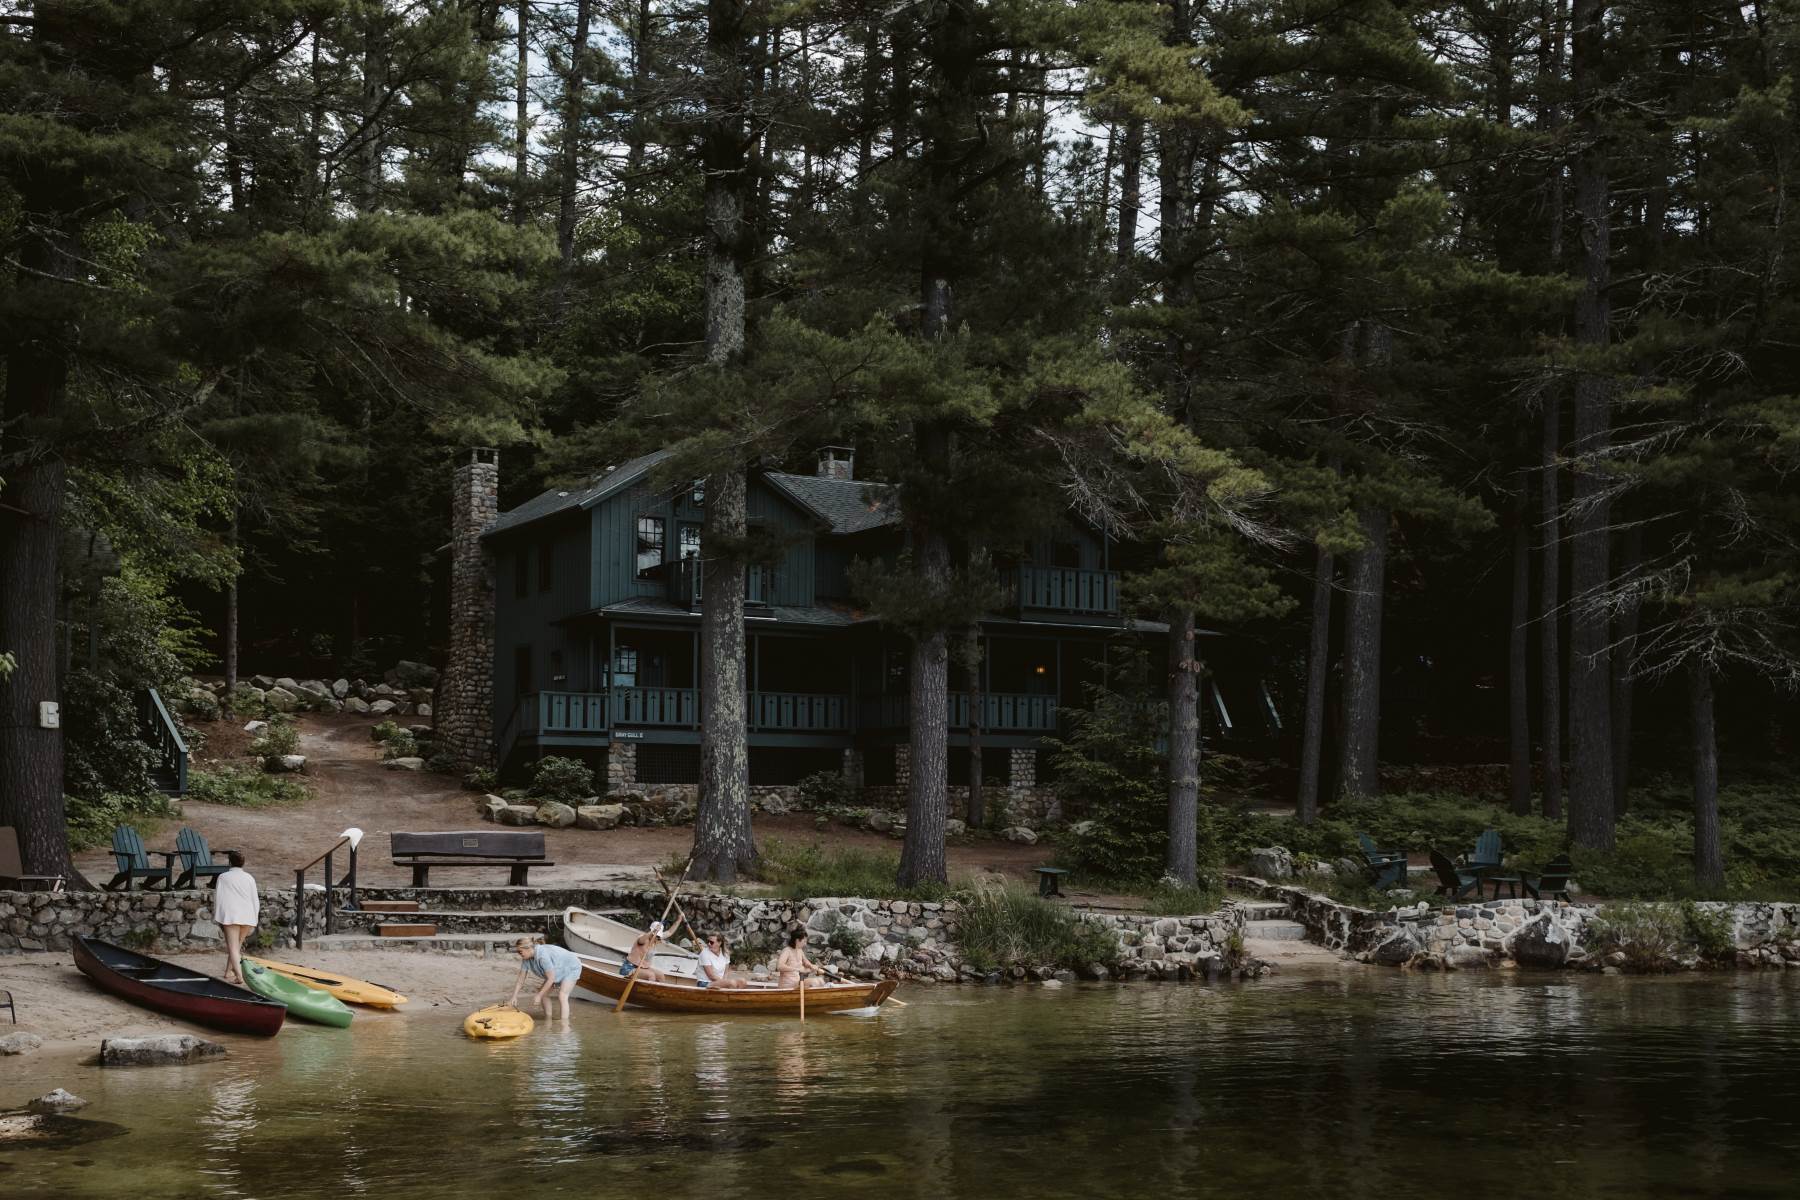 Top 5 best all-inclusive Maine vacation options, from a schooner cruise on the lake to secluded cottages in the woods alone with wildlife